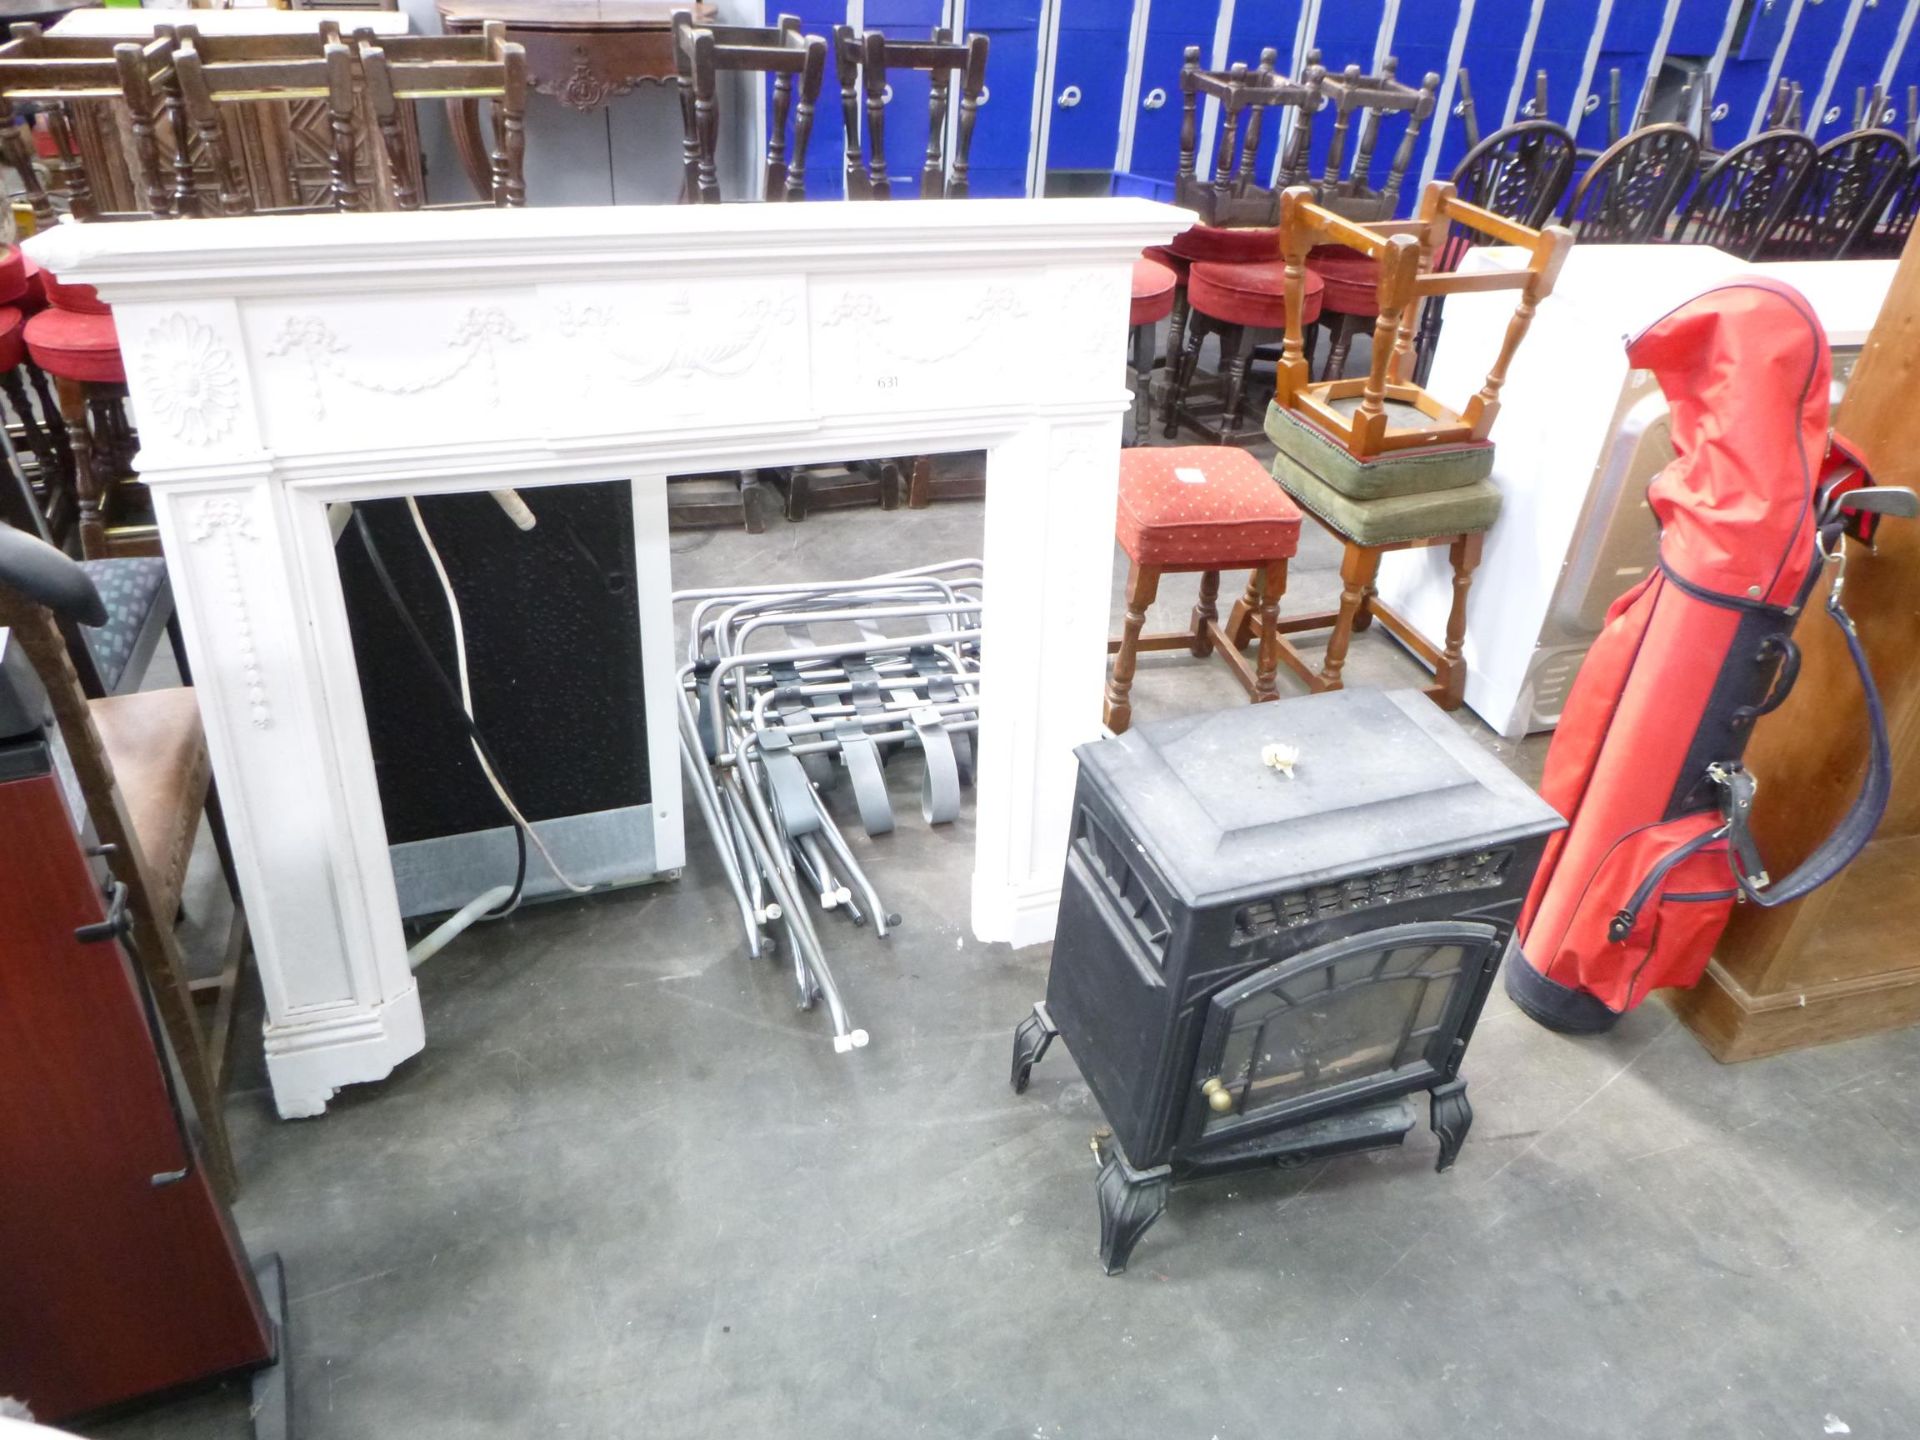 A Fire Surround A/F, A Gas Stove A/F and a Golf Bag and Clubs.